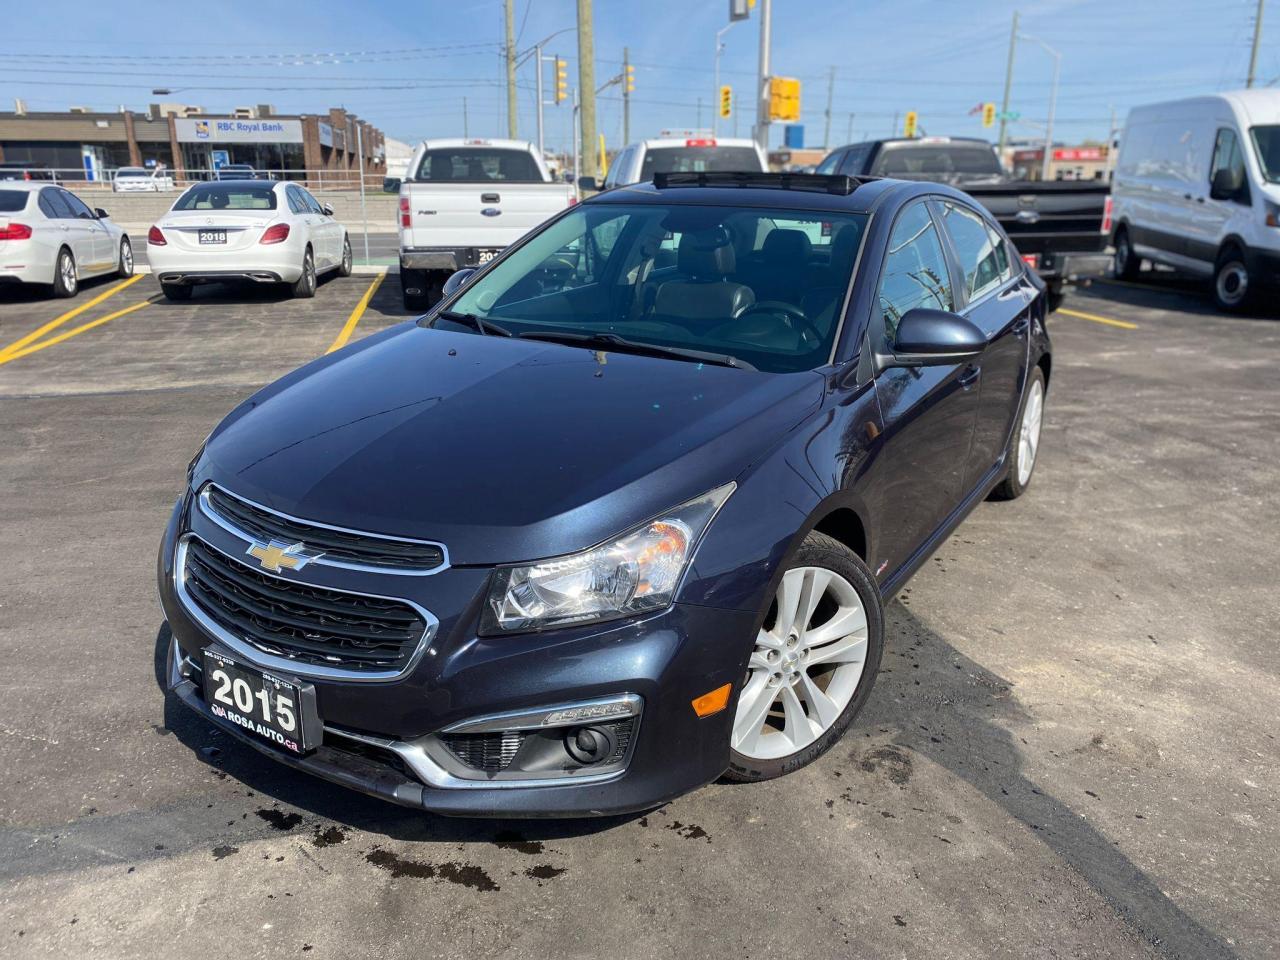 2015 Chevrolet Cruze R/S 2LT 6 SPEED Manuel LEATHER SUNROOF+WINTER TIRE - Photo #1